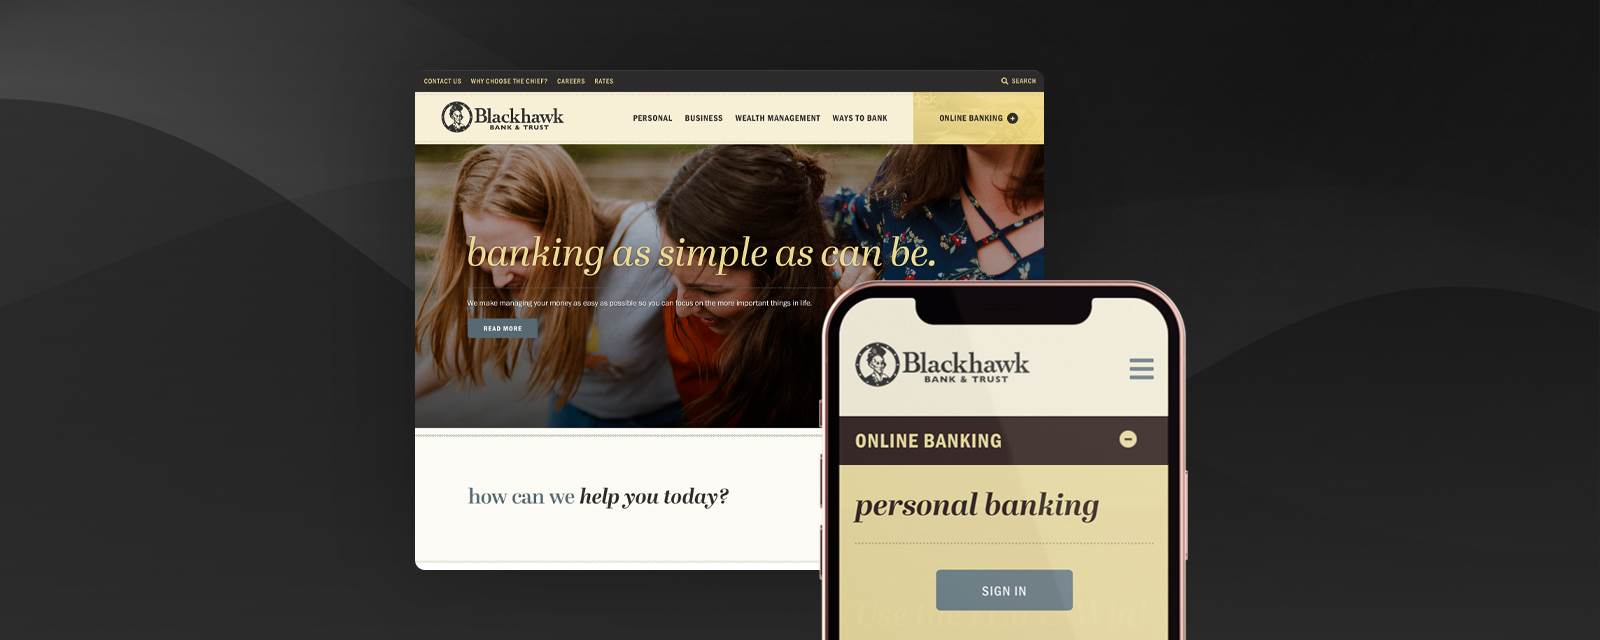 Read the Bank Website Redesign Boosts Users, User Satisfaction blog post